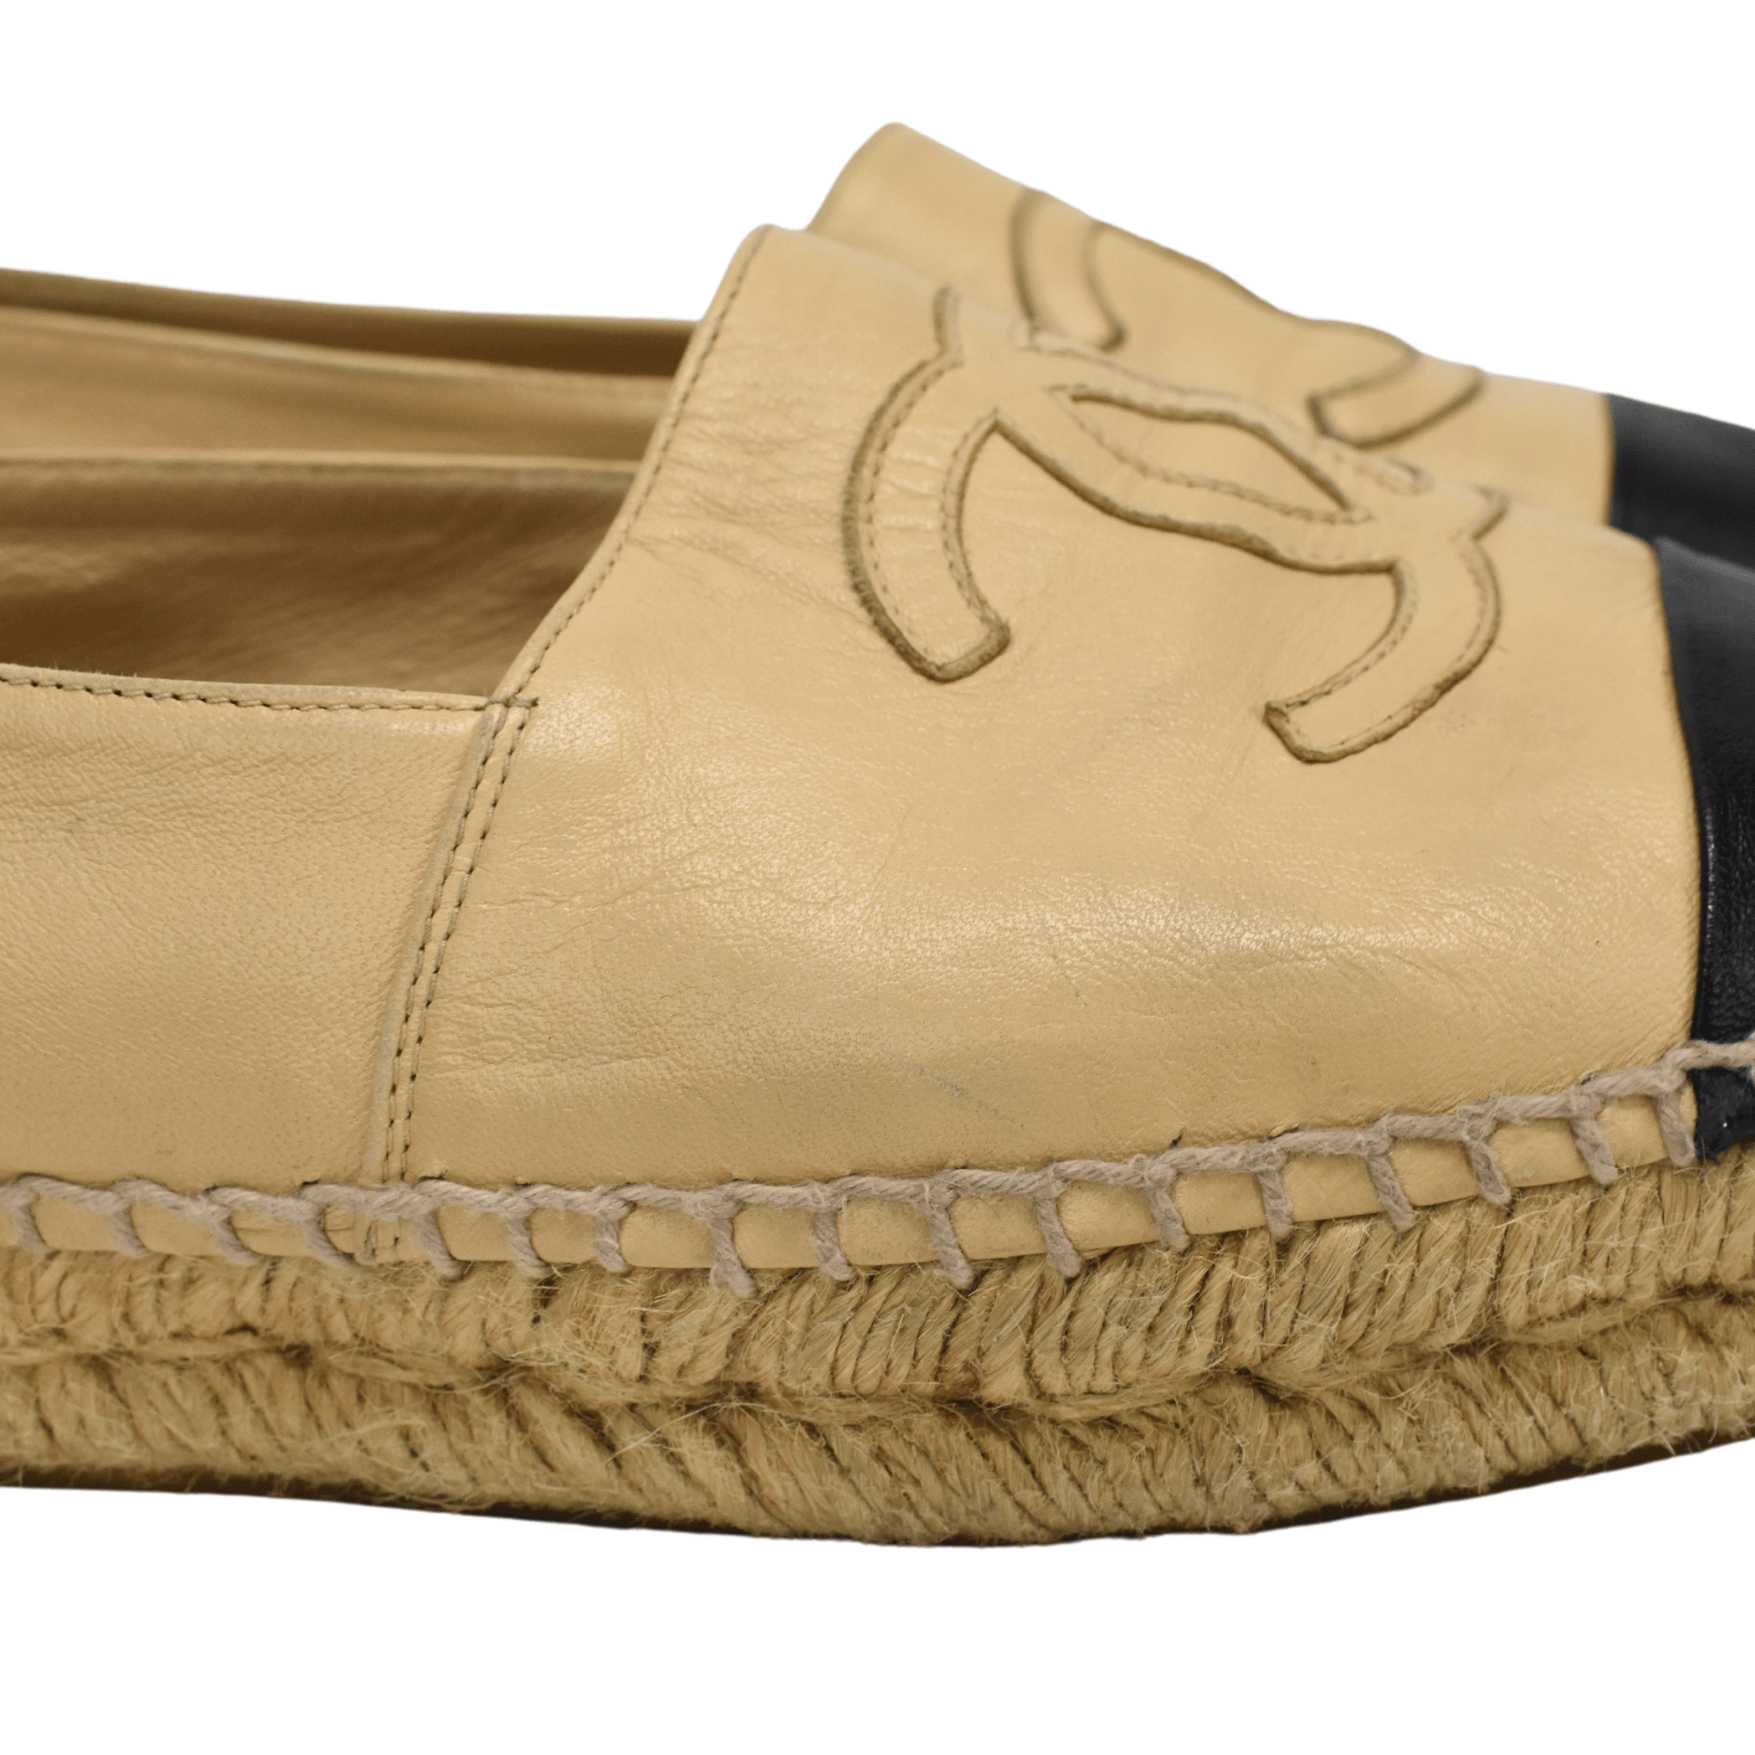 Chanel Espadrilles - Women's 37 - Fashionably Yours